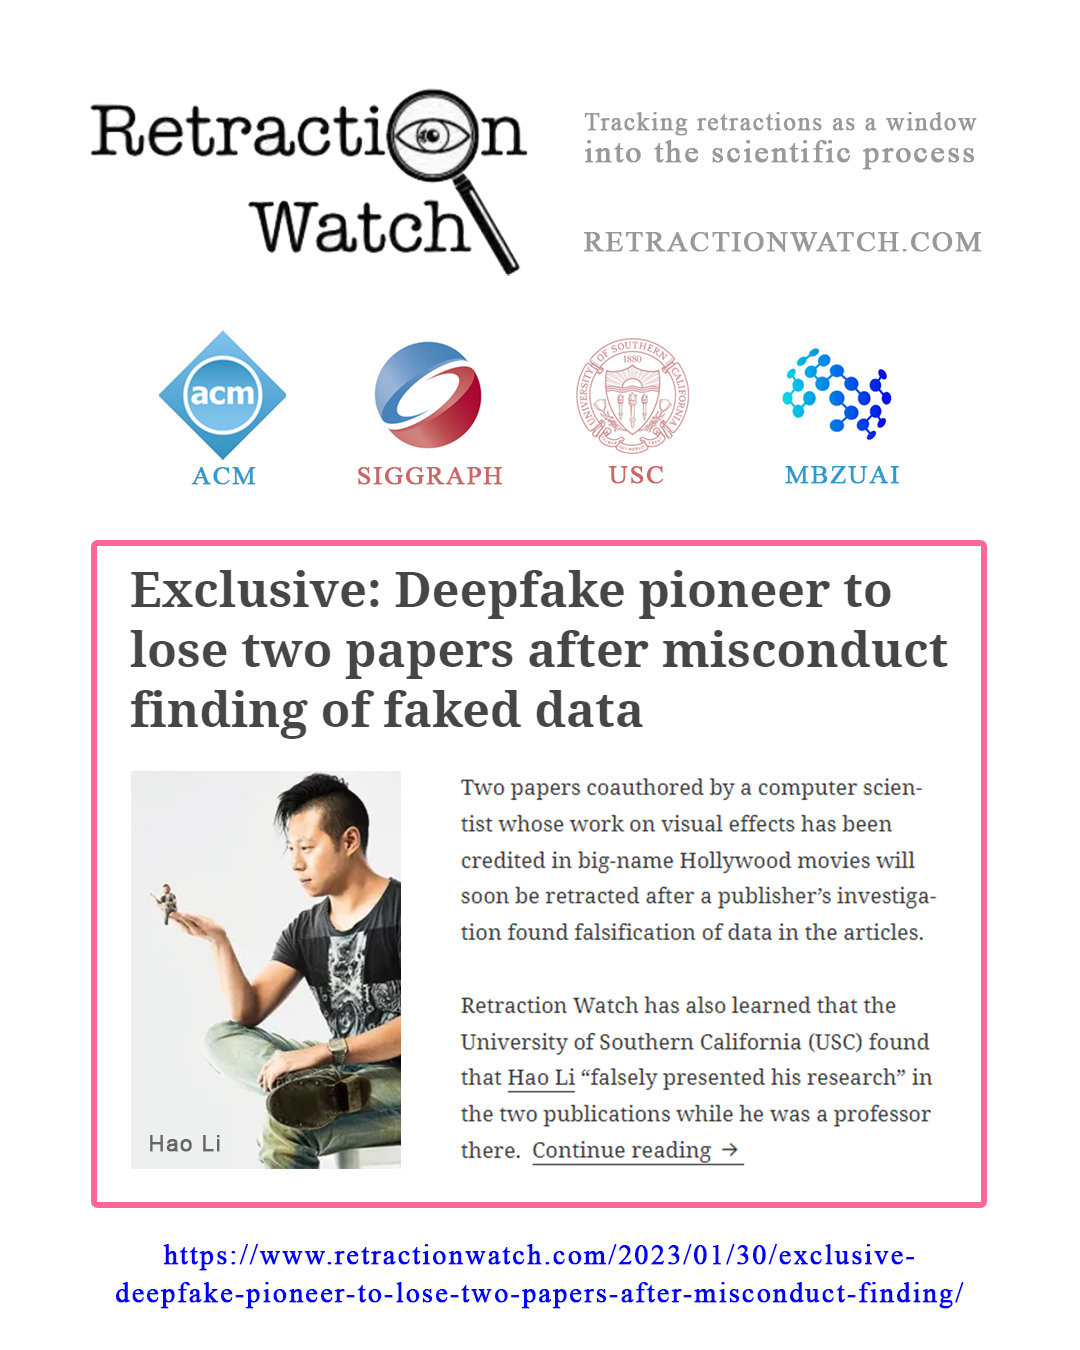 Retraction Watch's Exclusive Report on Hao Li's and Pinscreen's Scientific Misconduct